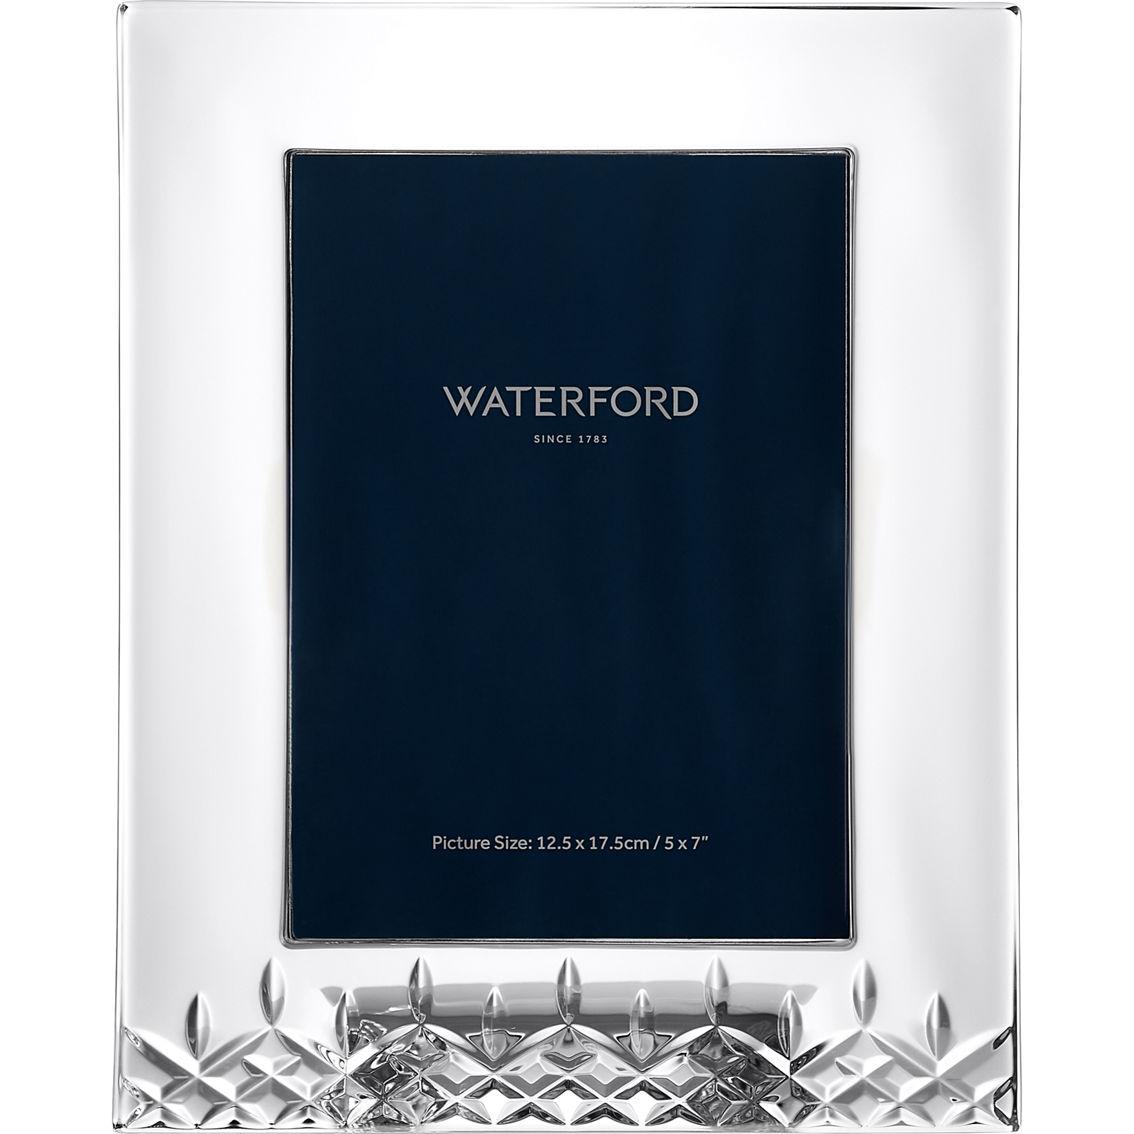 Waterford Lismore Essence Frame 5 x 7 in. - Image 1 of 2